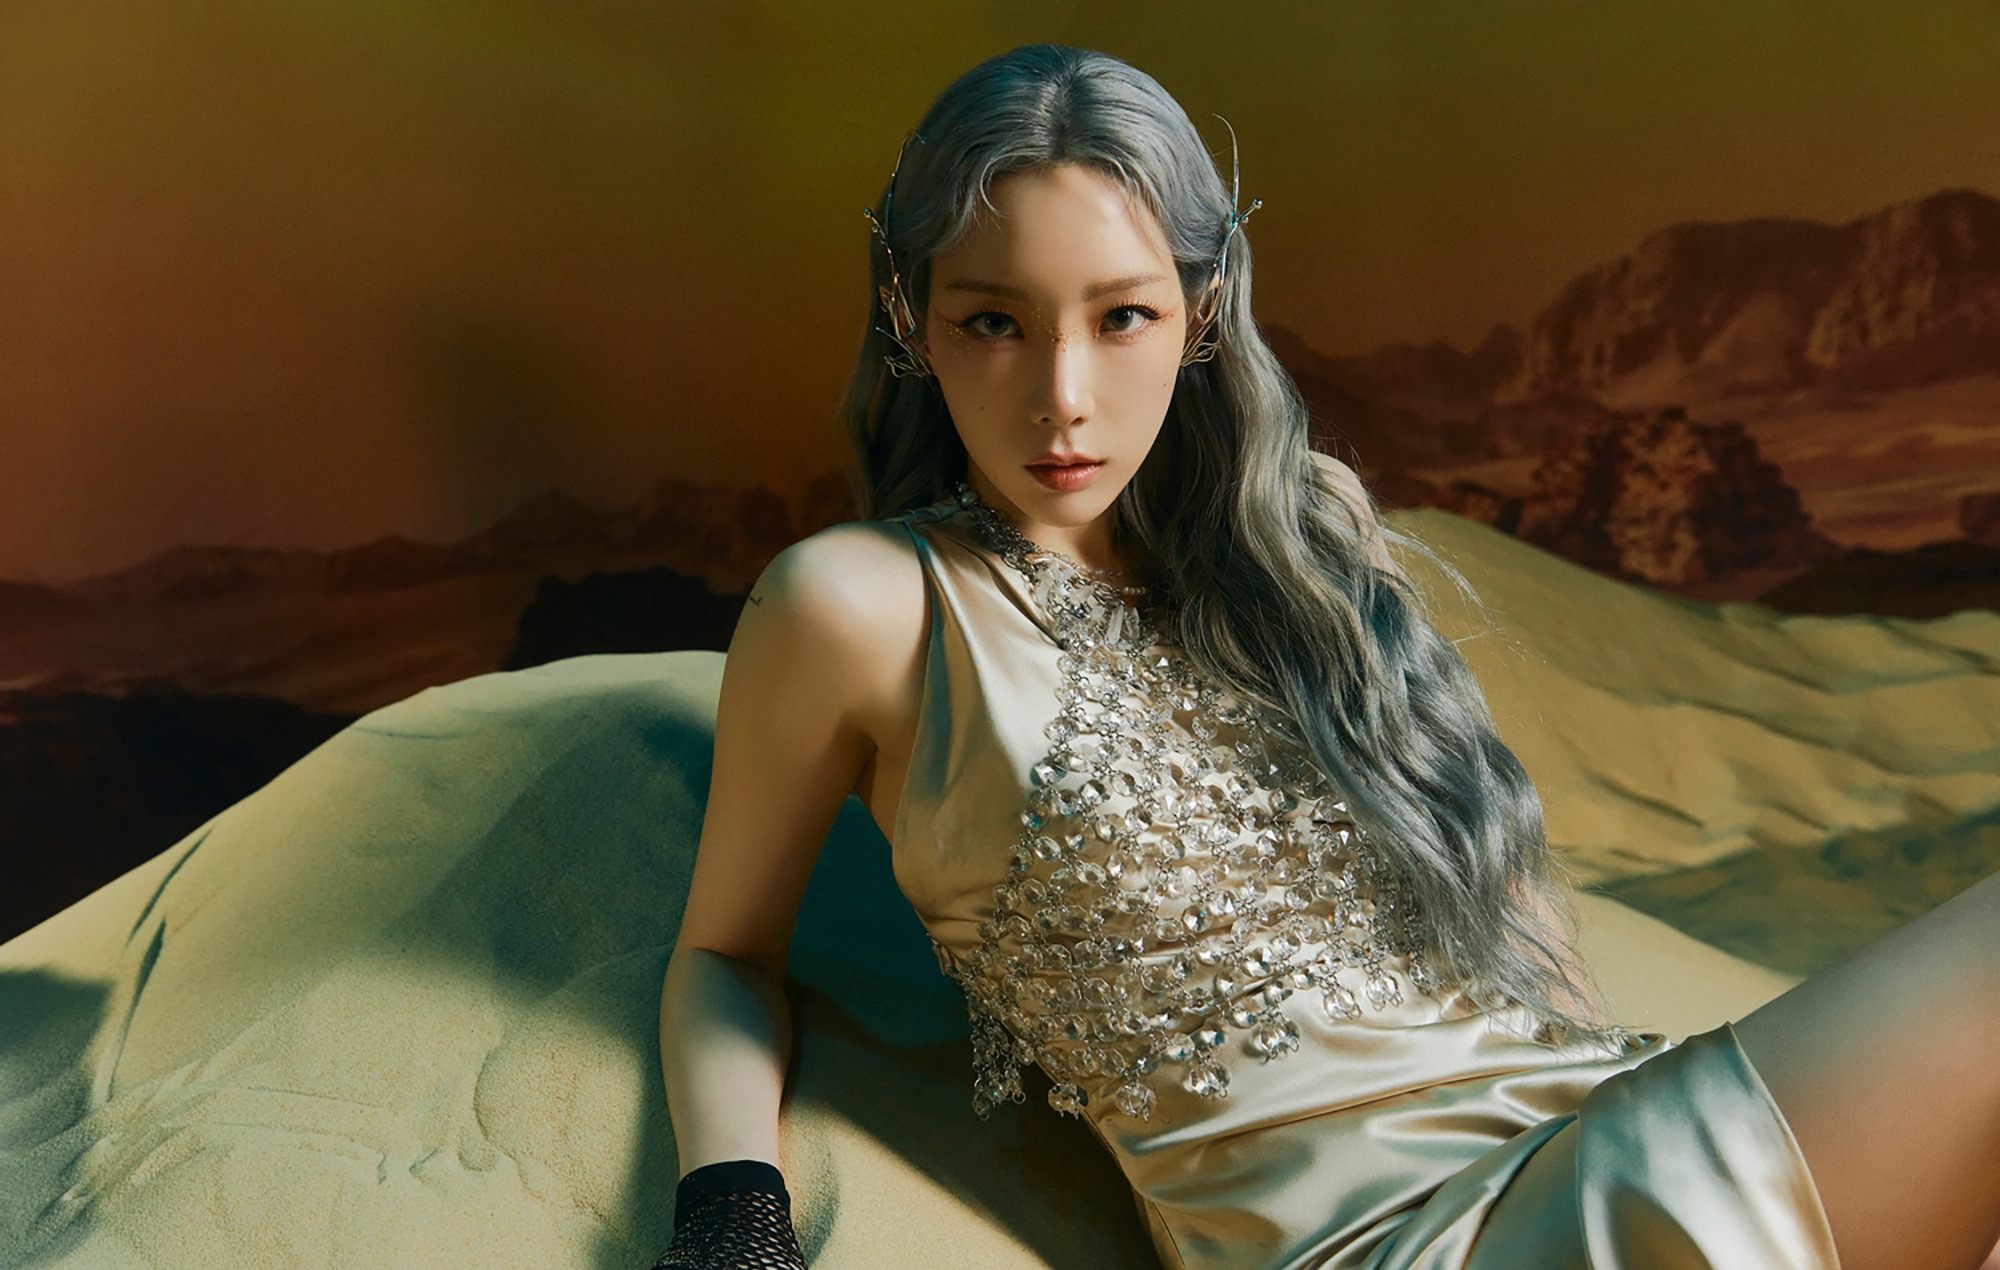 Taeyeon talks Girls’ Generation: “It always feels like home when we’re all together”